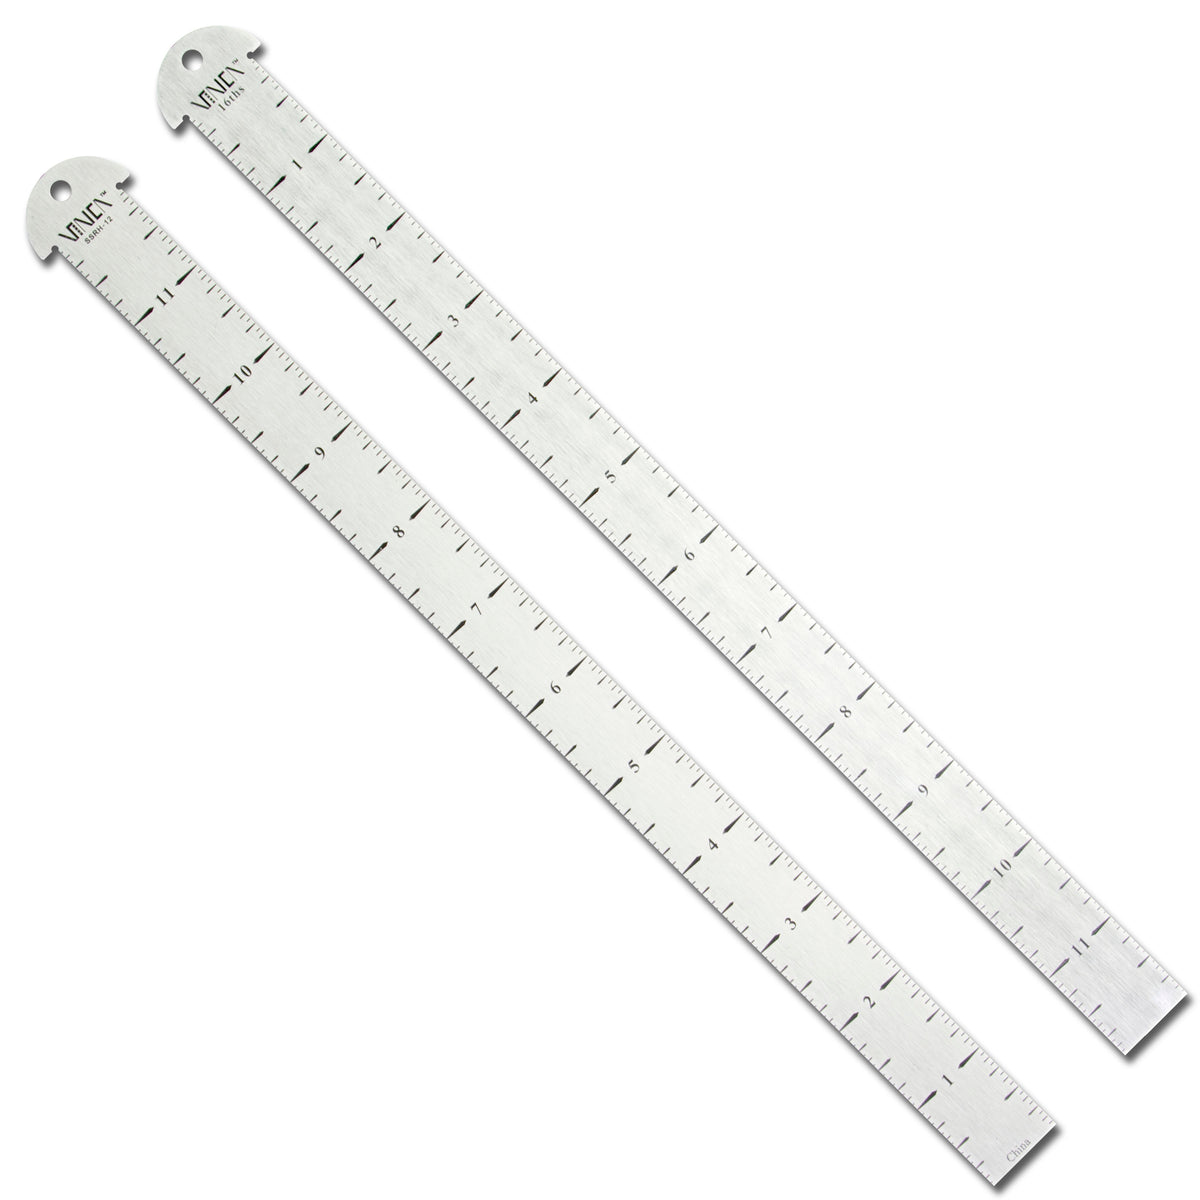 12 Stainless Steel Ruler - SJNJW266 - IdeaStage Promotional Products